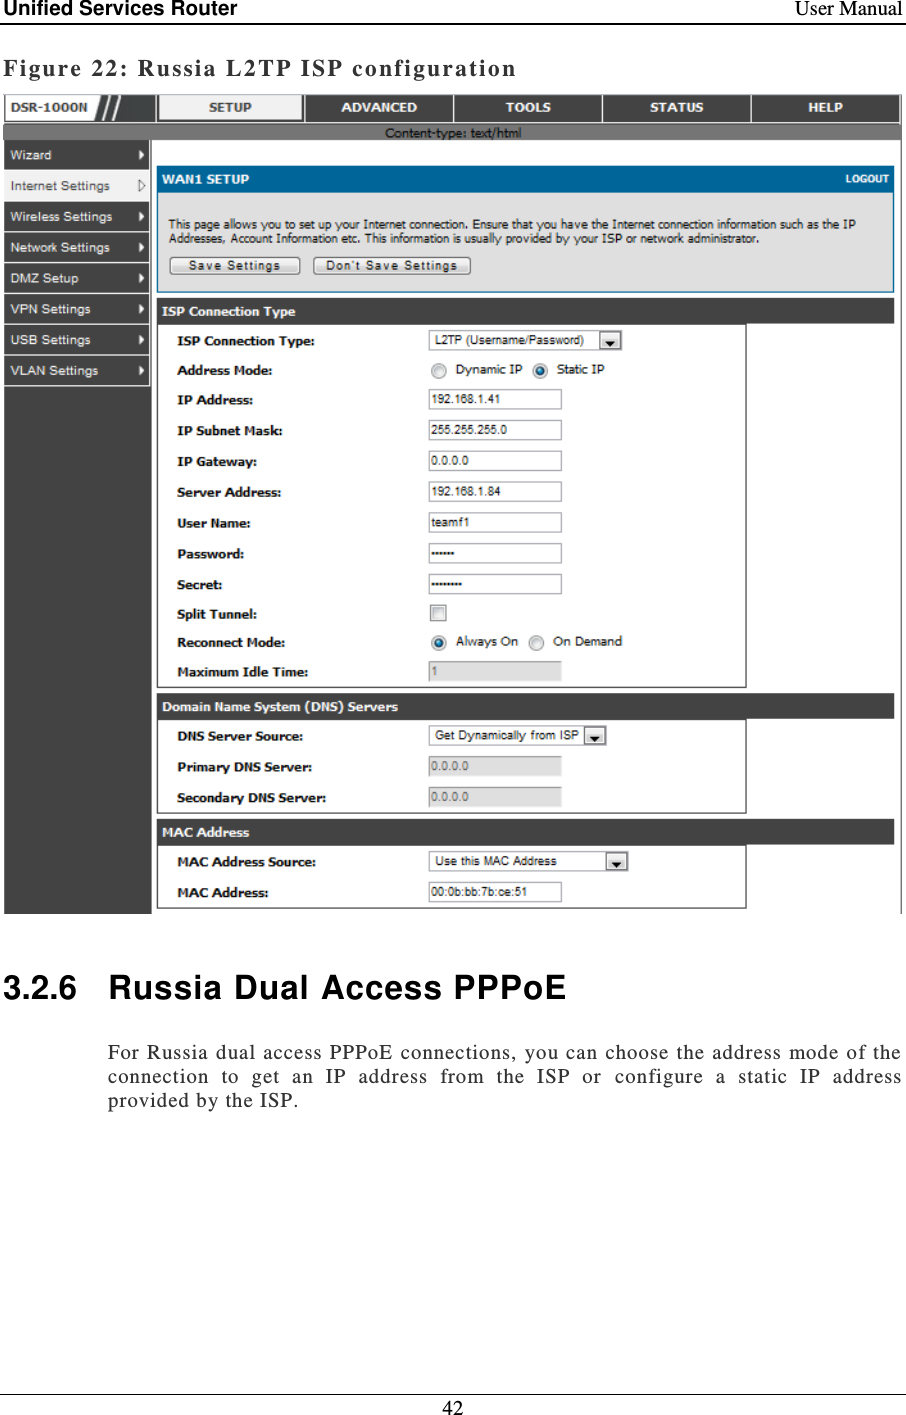 Unified Services Router    User Manual 42  Figure 22: Russia L2TP ISP configuration    3.2.6  Russia Dual Access PPPoE For Russia  dual  access PPPoE connections,  you  can  choose  the  address  mode of  the connection  to  get  an  IP  address  from  the  ISP  or  configure  a  static  IP  address provided by the ISP.  